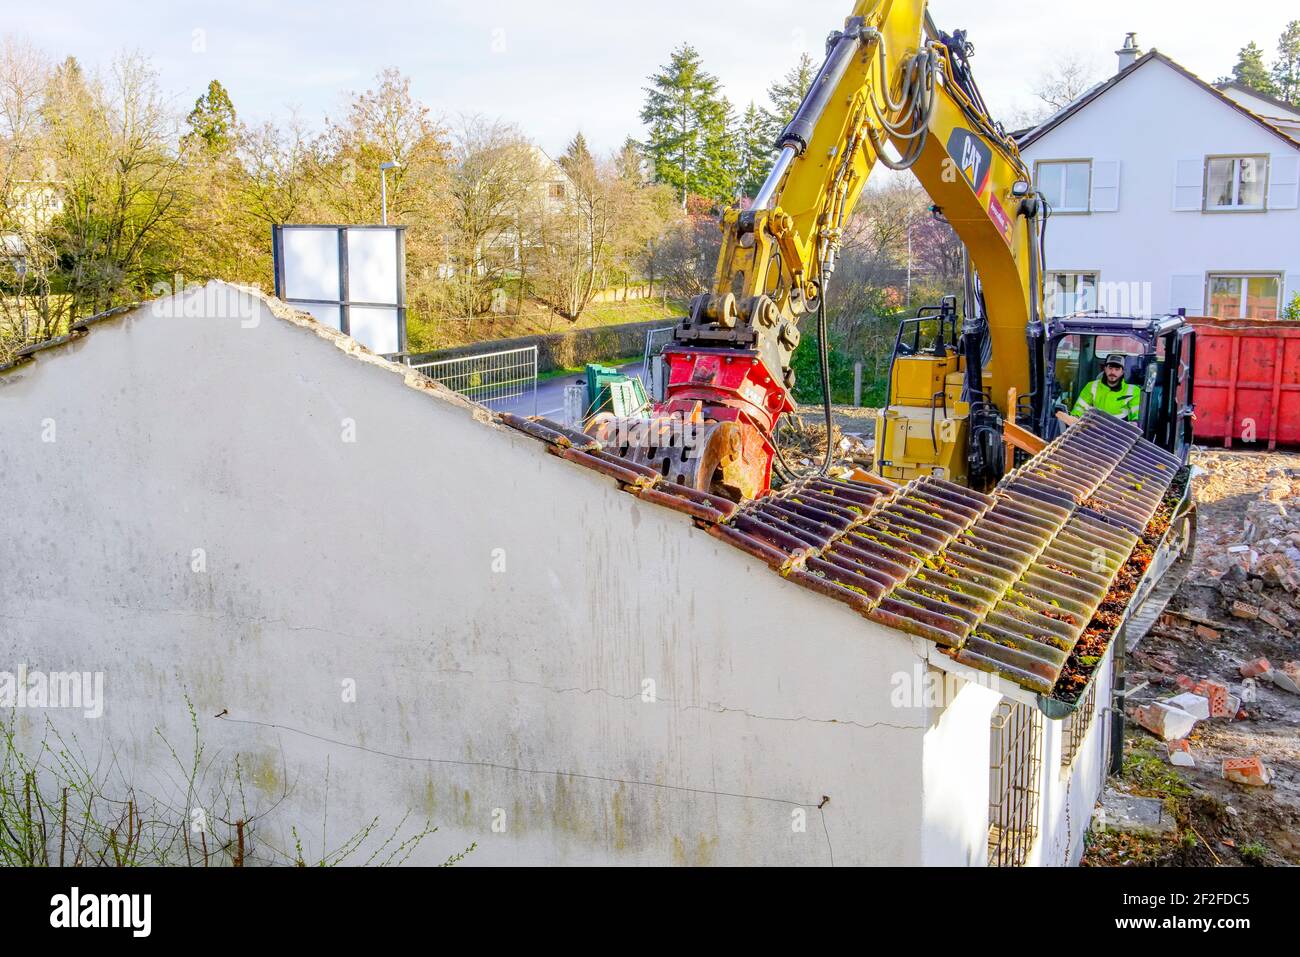 Heavy bulldozer tearing down a villa and frees up space for a new building. Riehen, Switzerland. Stock Photo